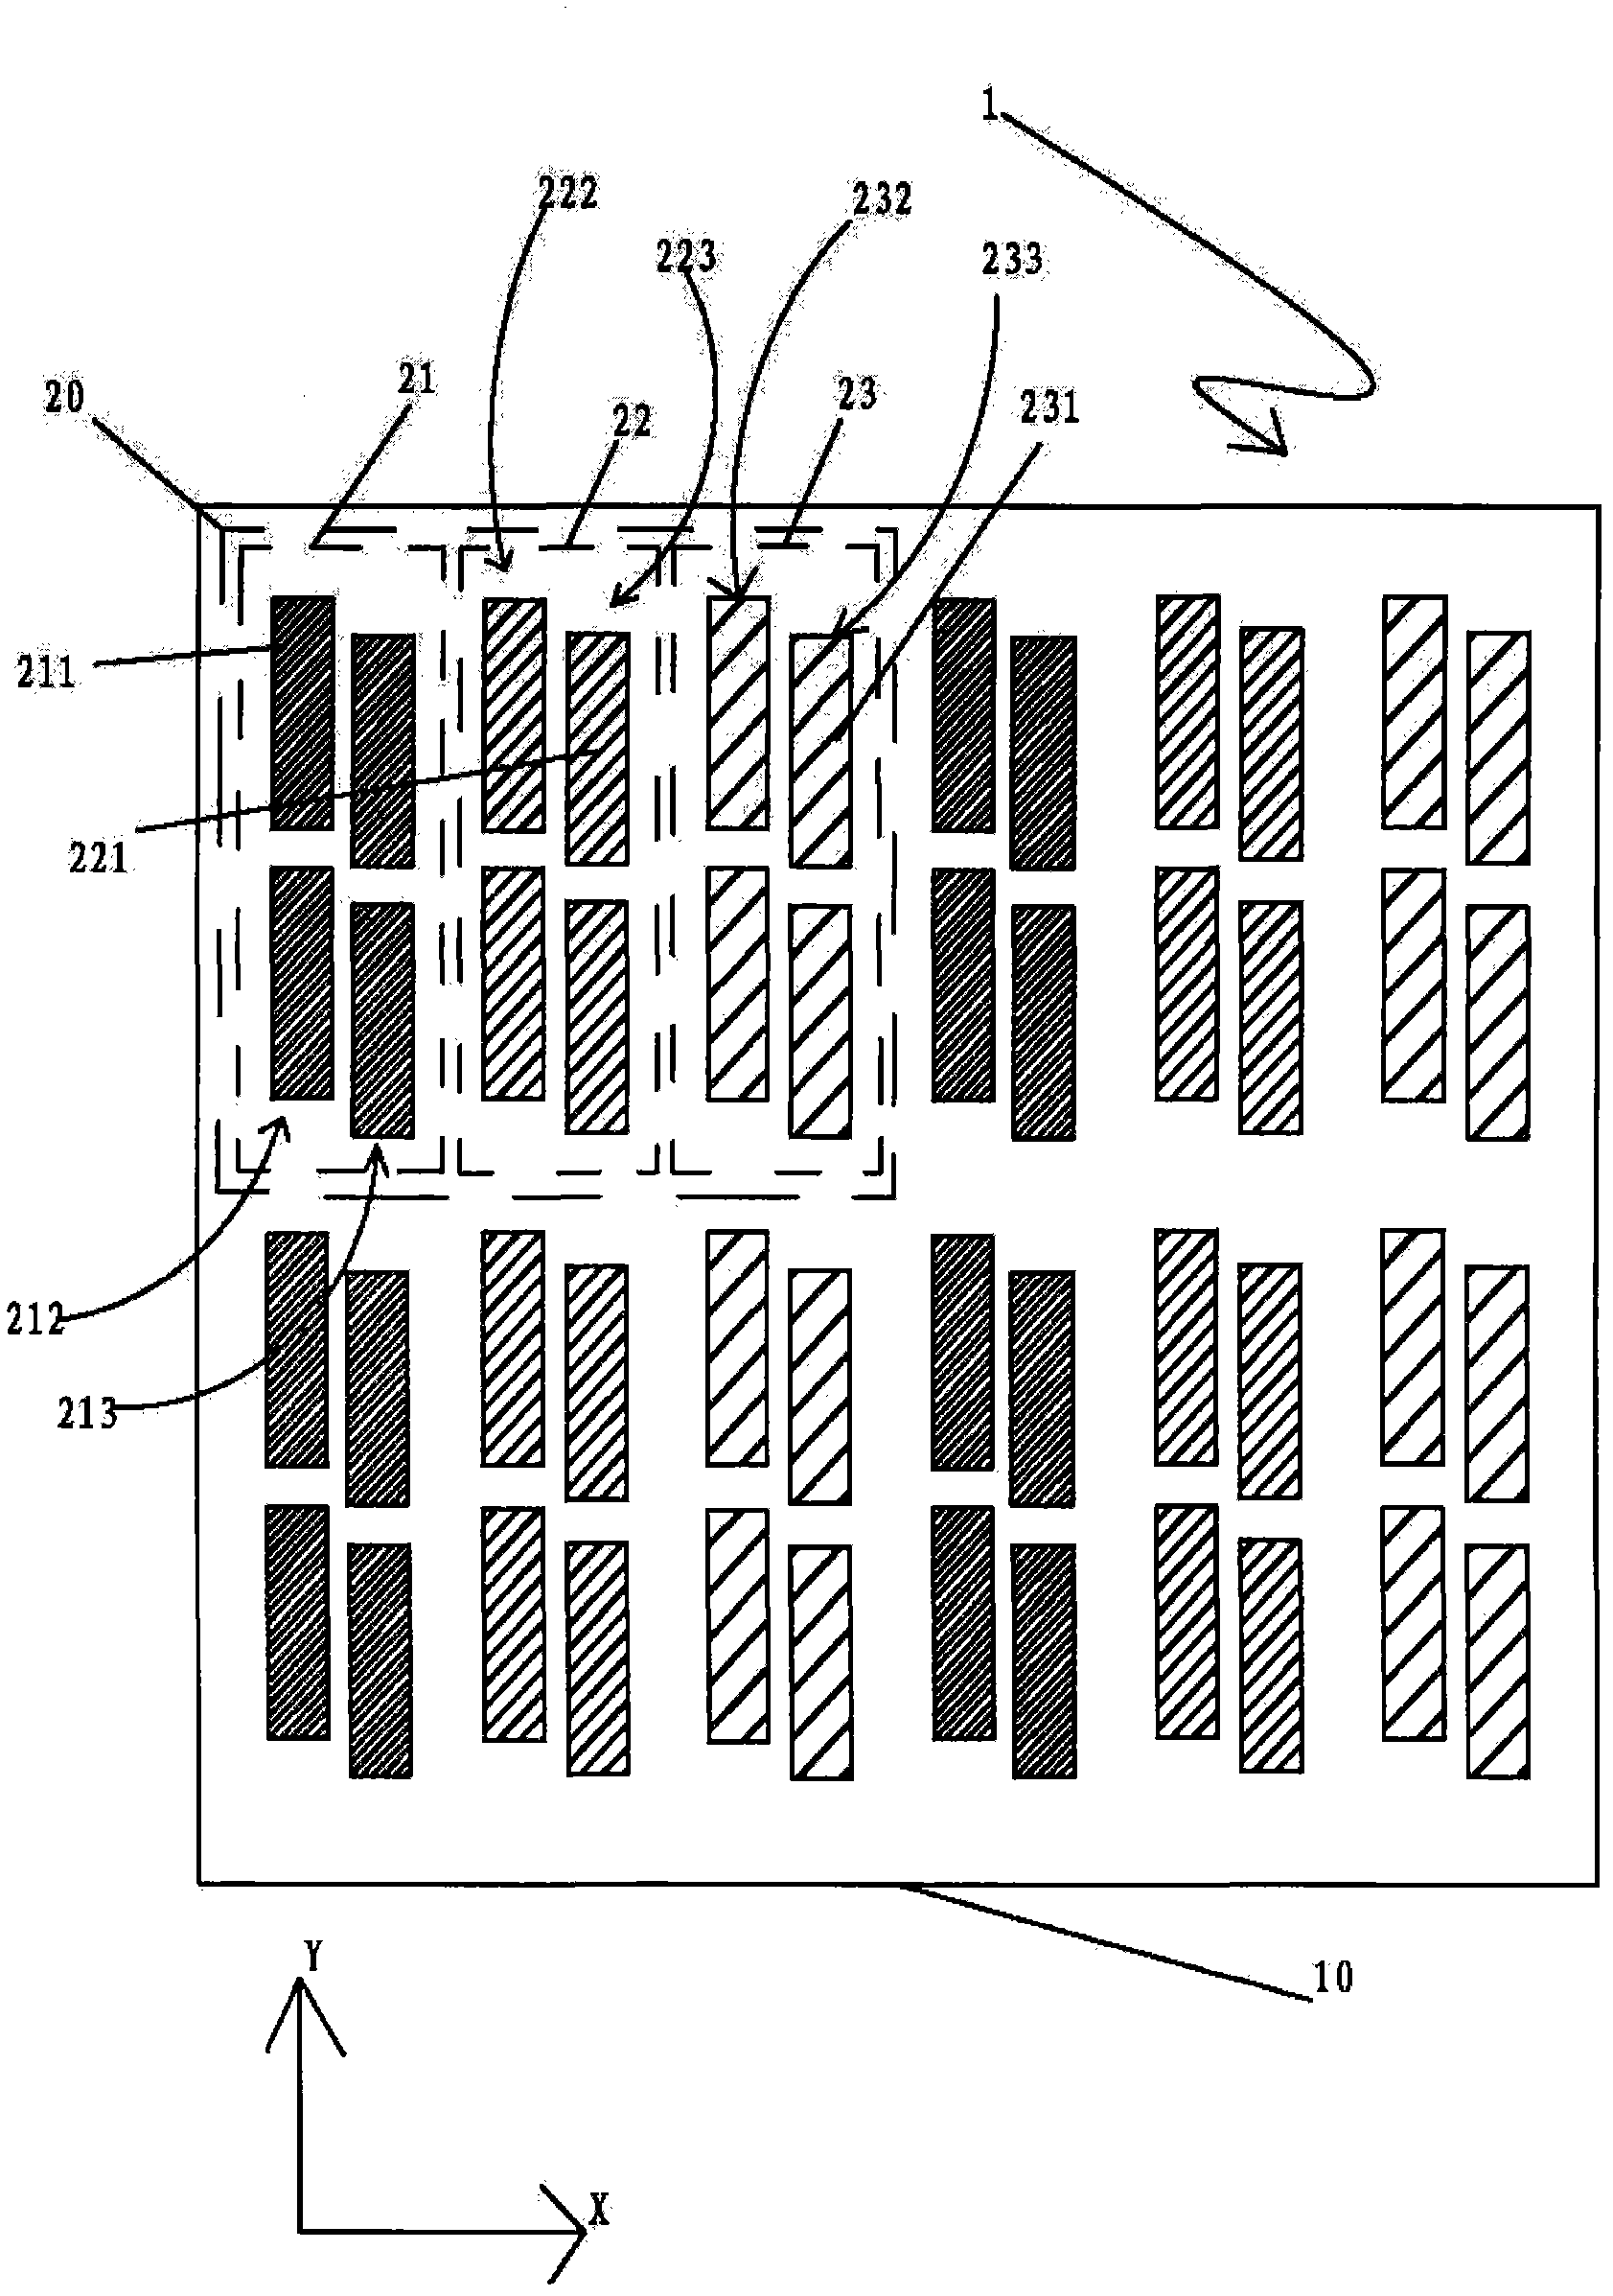 Pixel structure of organic light emitting diode (OLED)